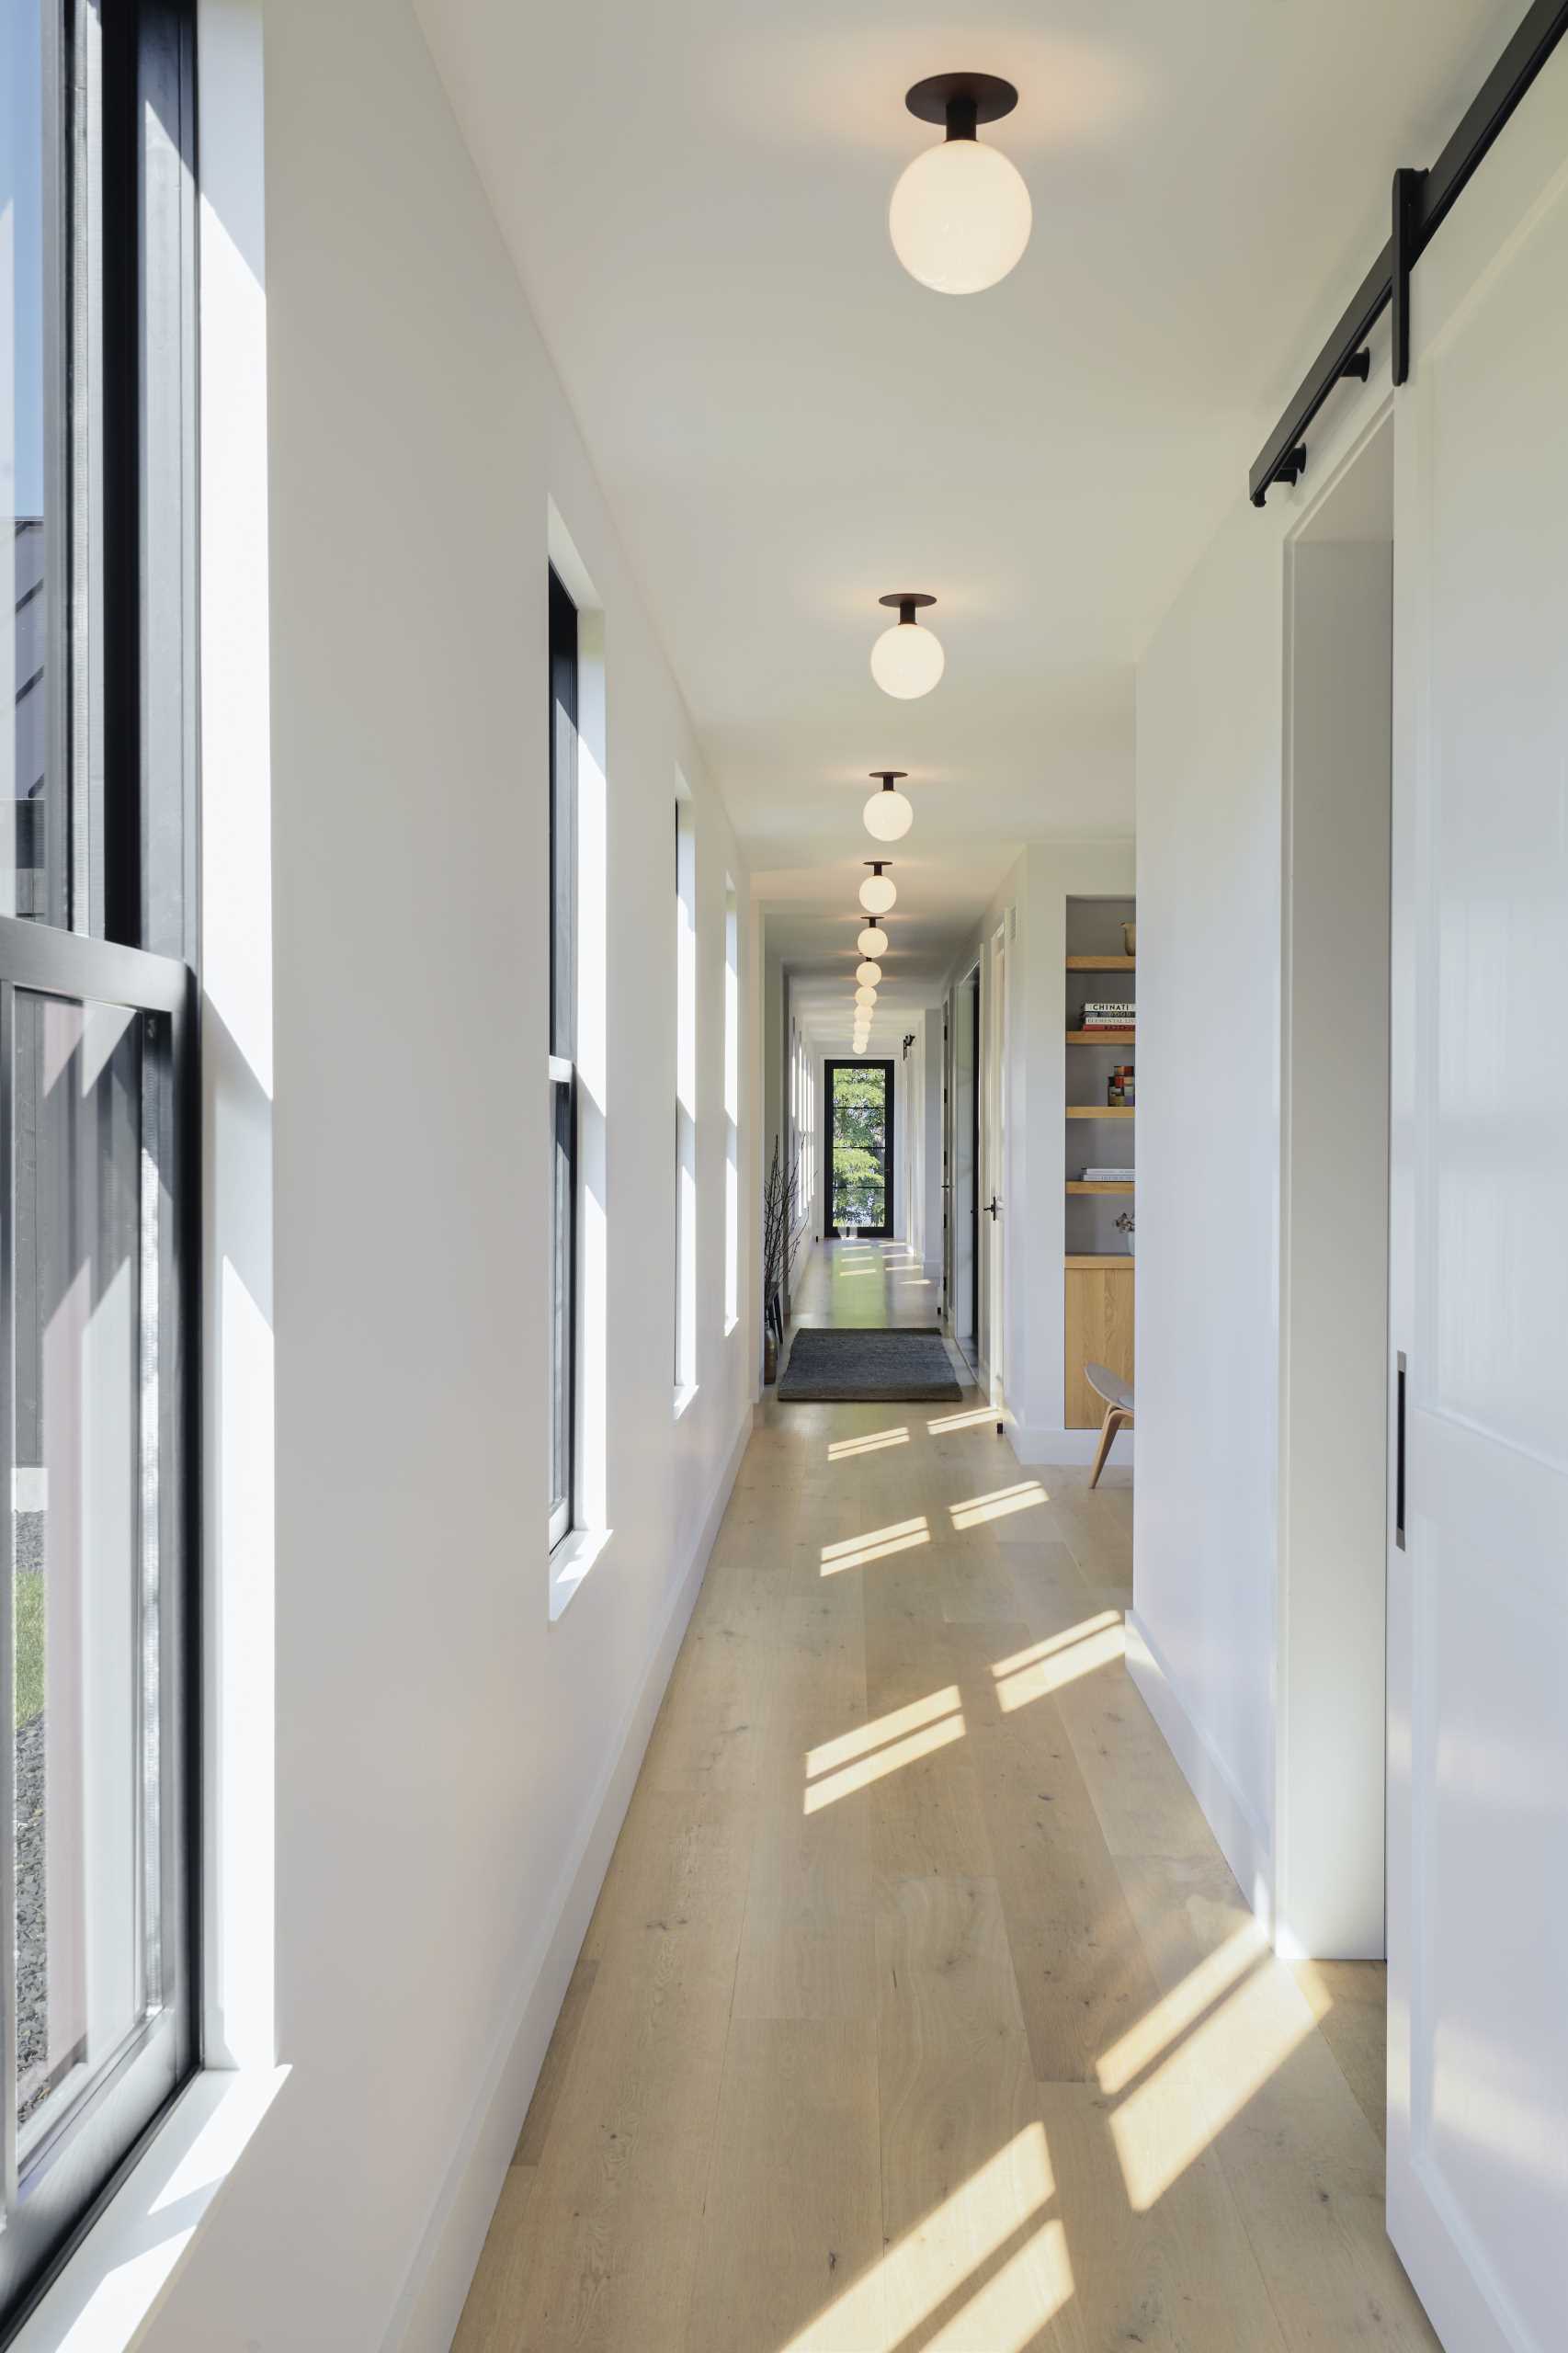 This hallway showcases the wood floor found throughout the interior, and provides access to all of the various areas of the home.